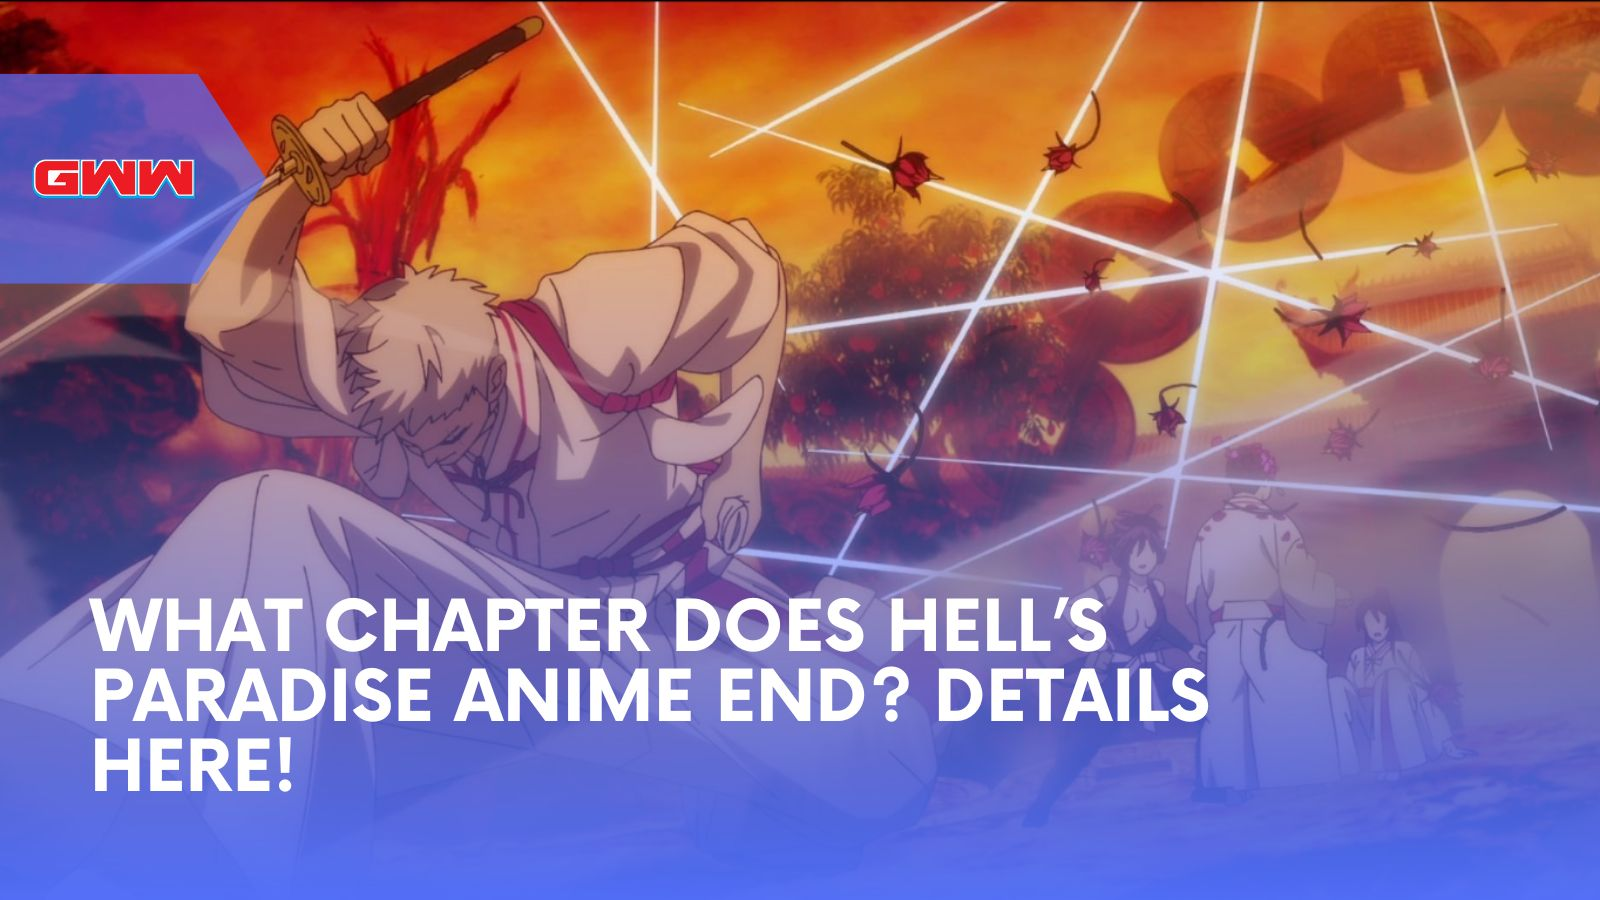 What Chapter Does Hells Paradise Anime End? Get the Details!